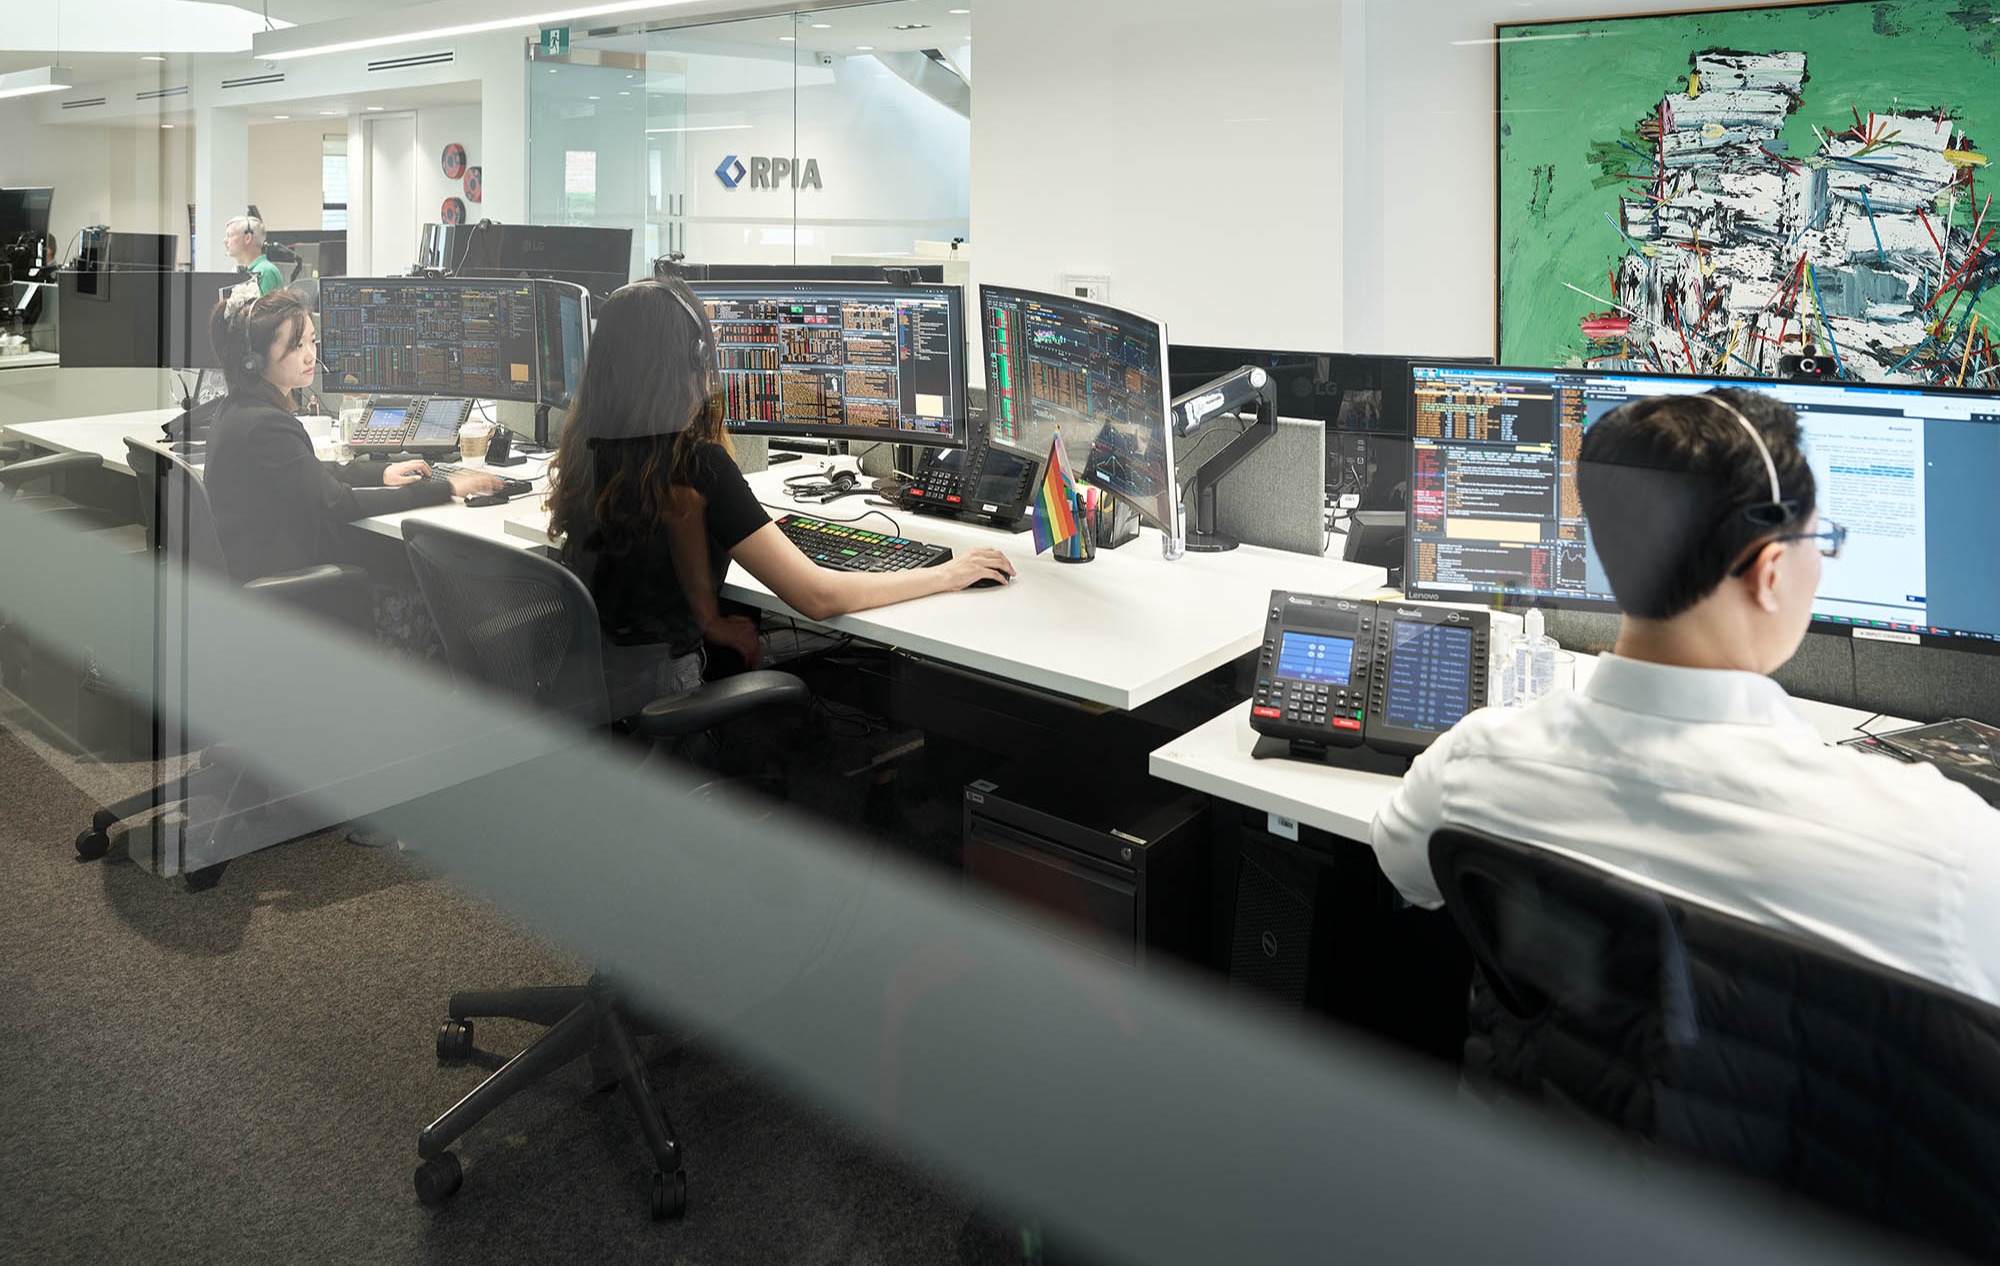 RPIA employees at the trading desk